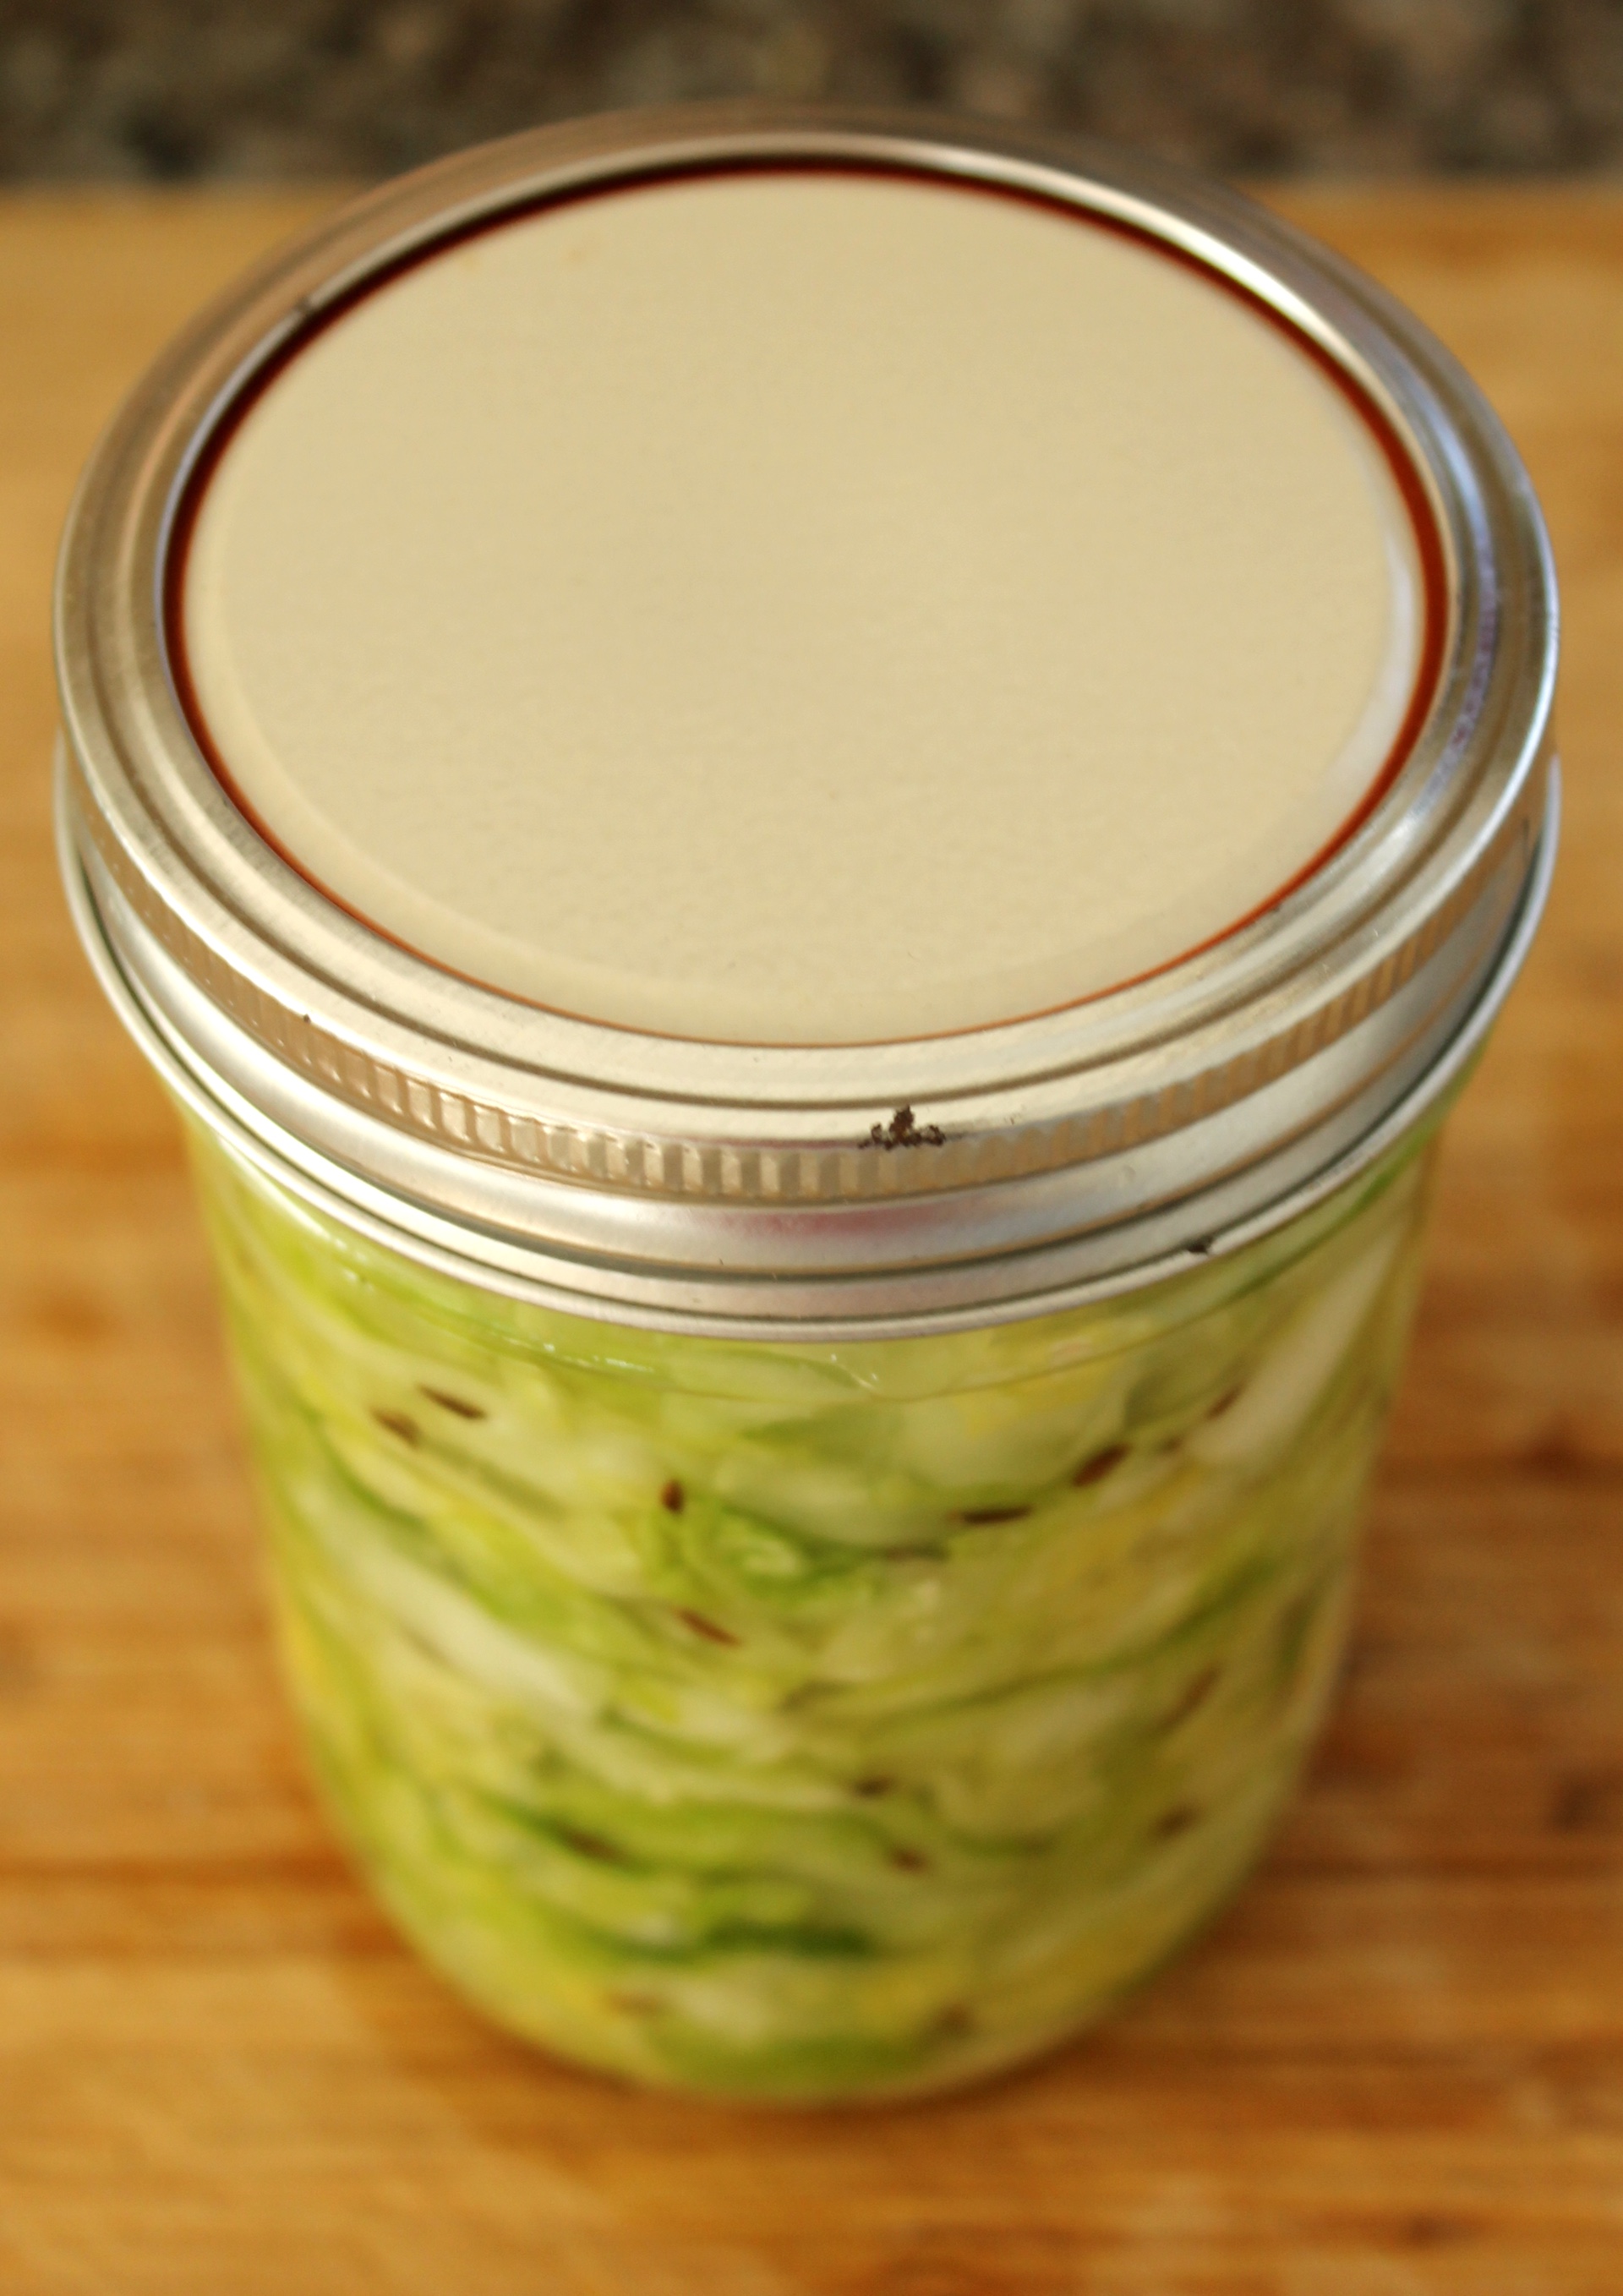 You can cover the jar with a loosely fitting canning lid; flip the lid so that the gasket side is facing up.